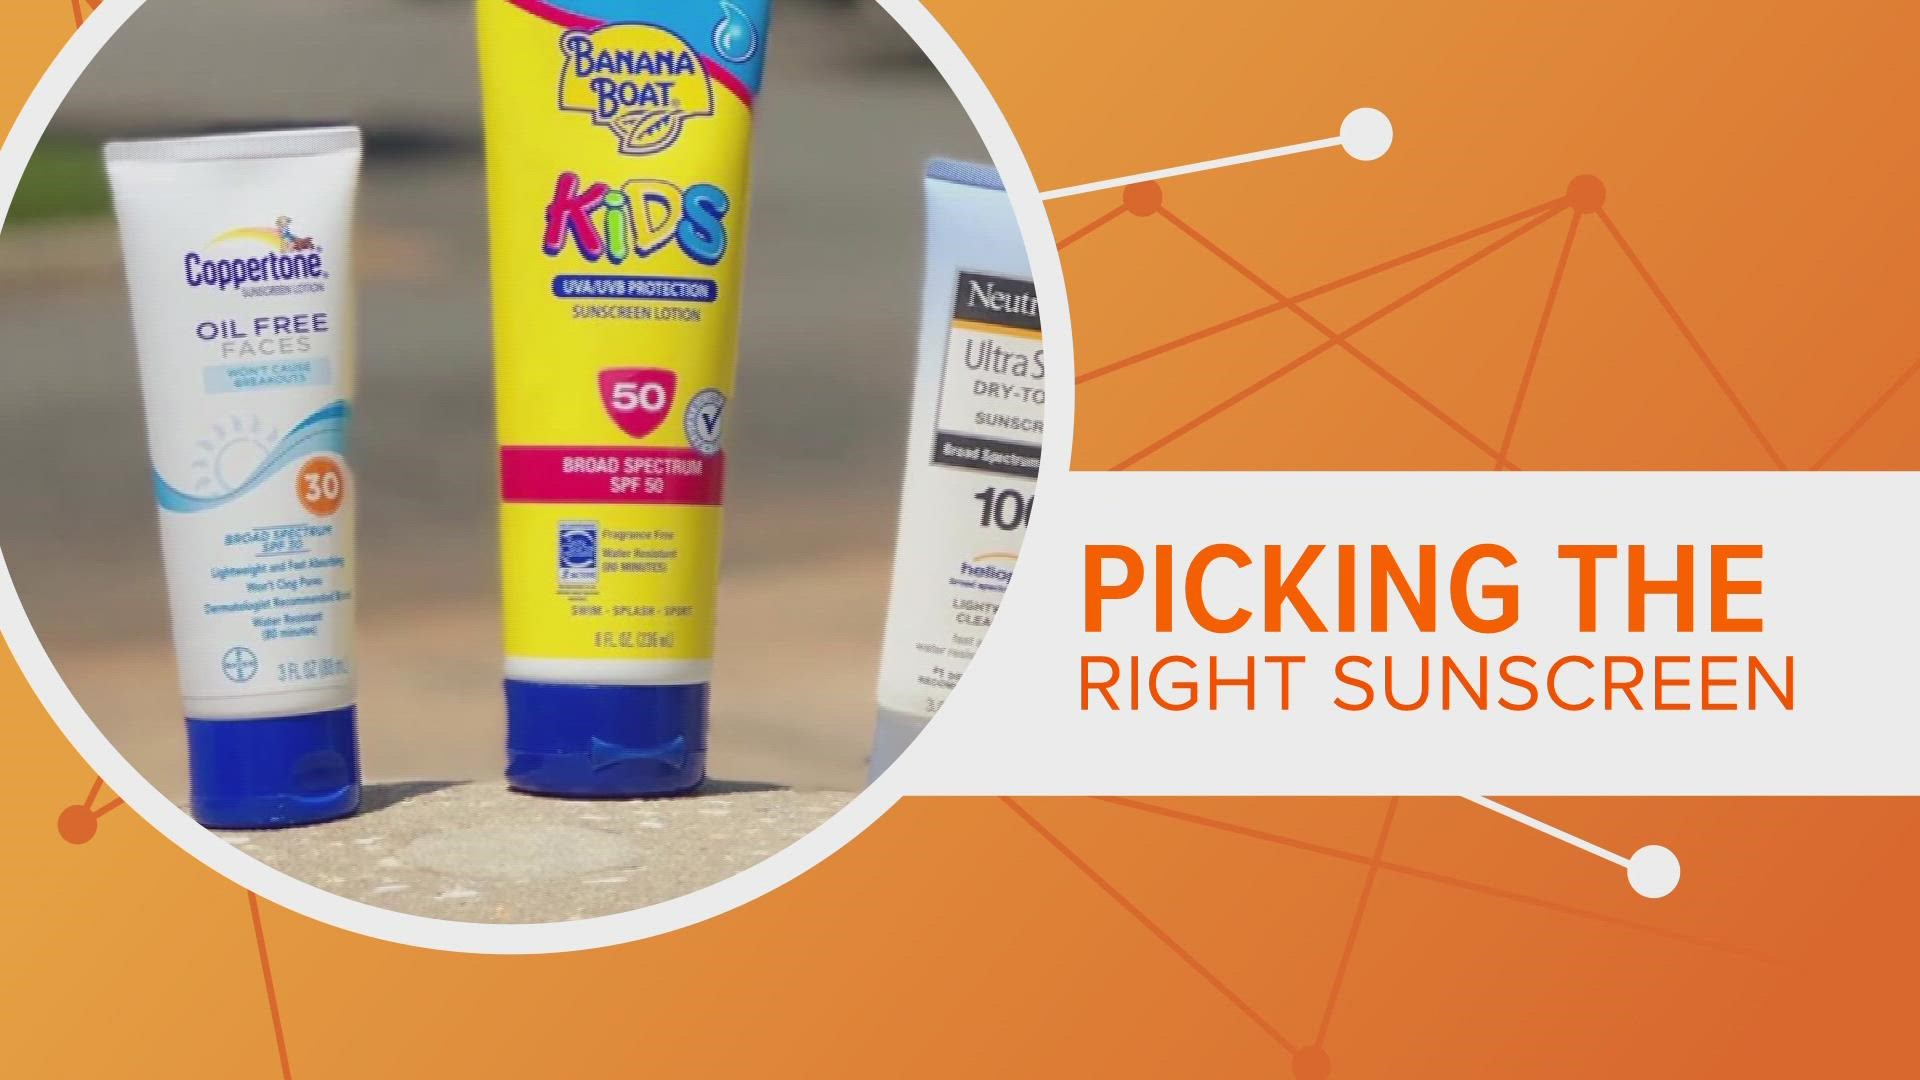 Studies indicate some sunscreens may create other problems.